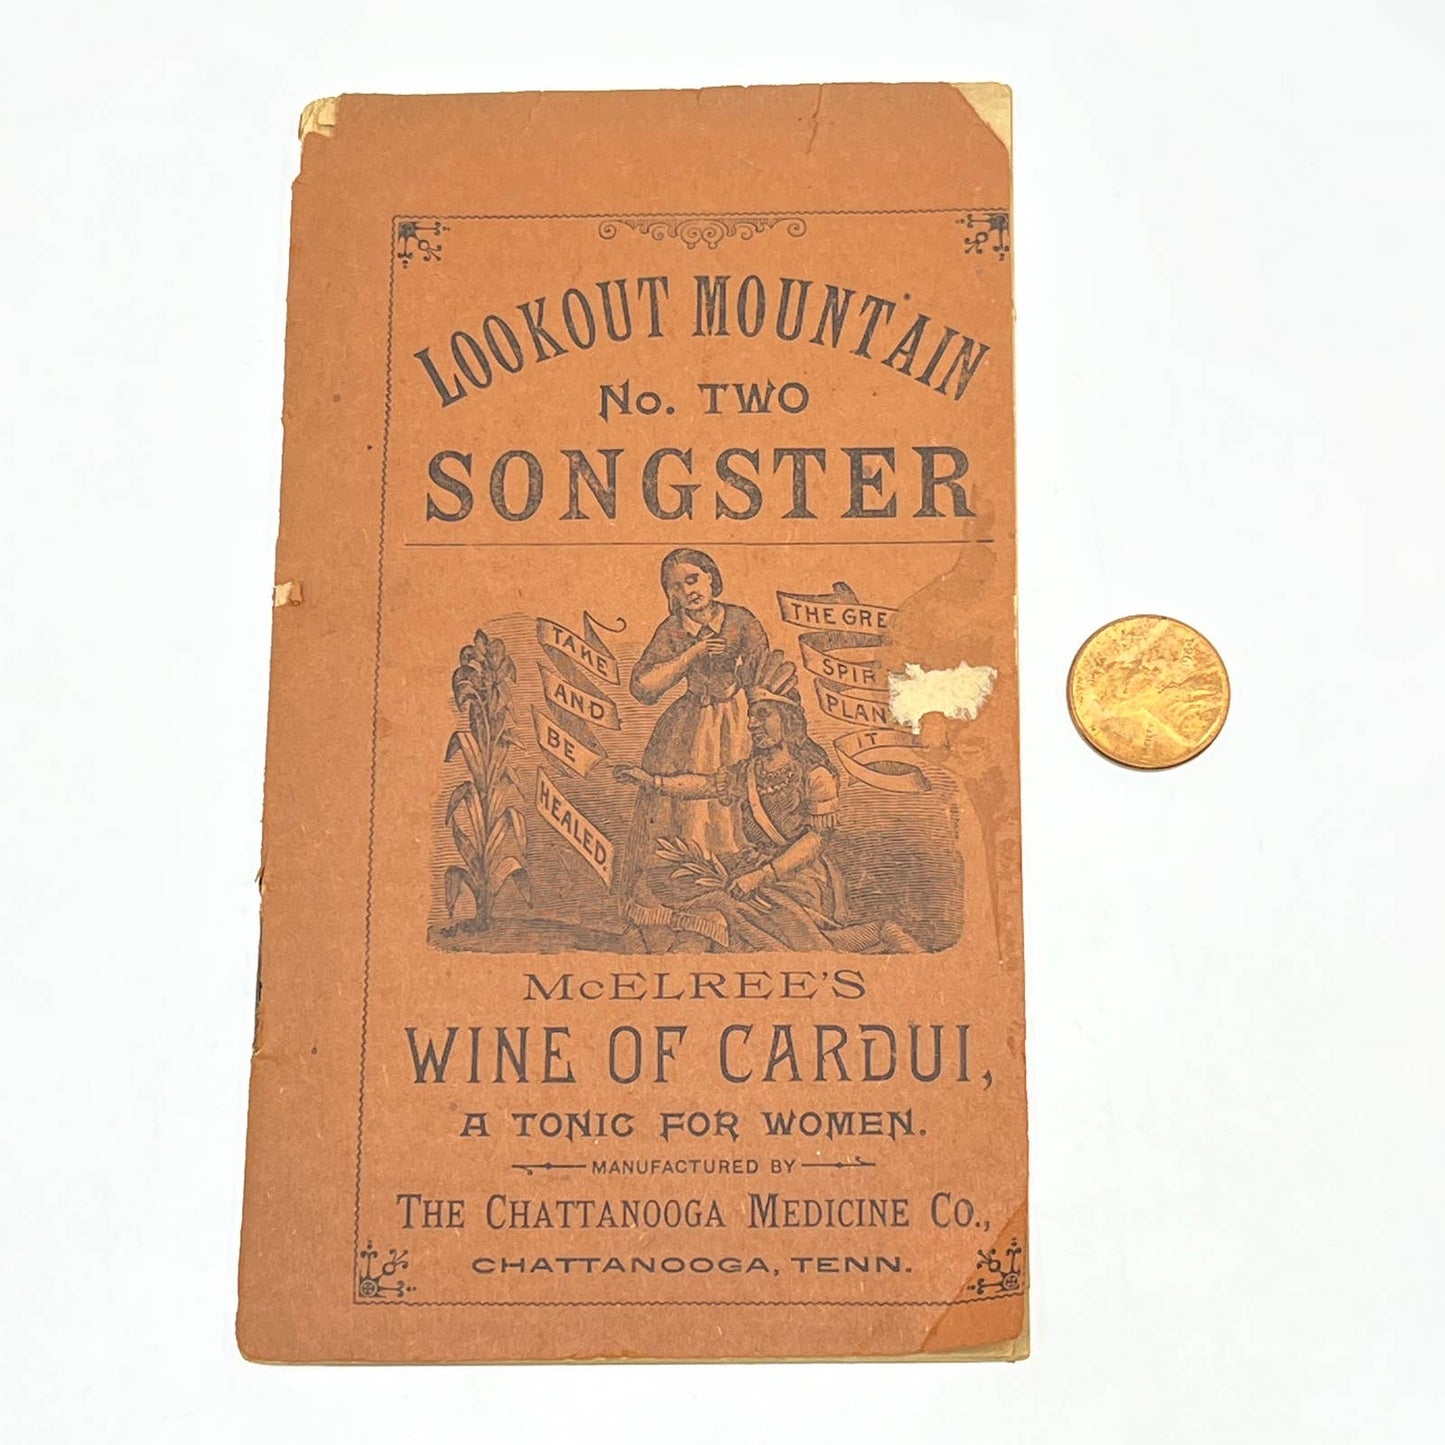 1880s Chattanooga Medicine Lookout Mountain #2 Songster Quakery Booklet AC3